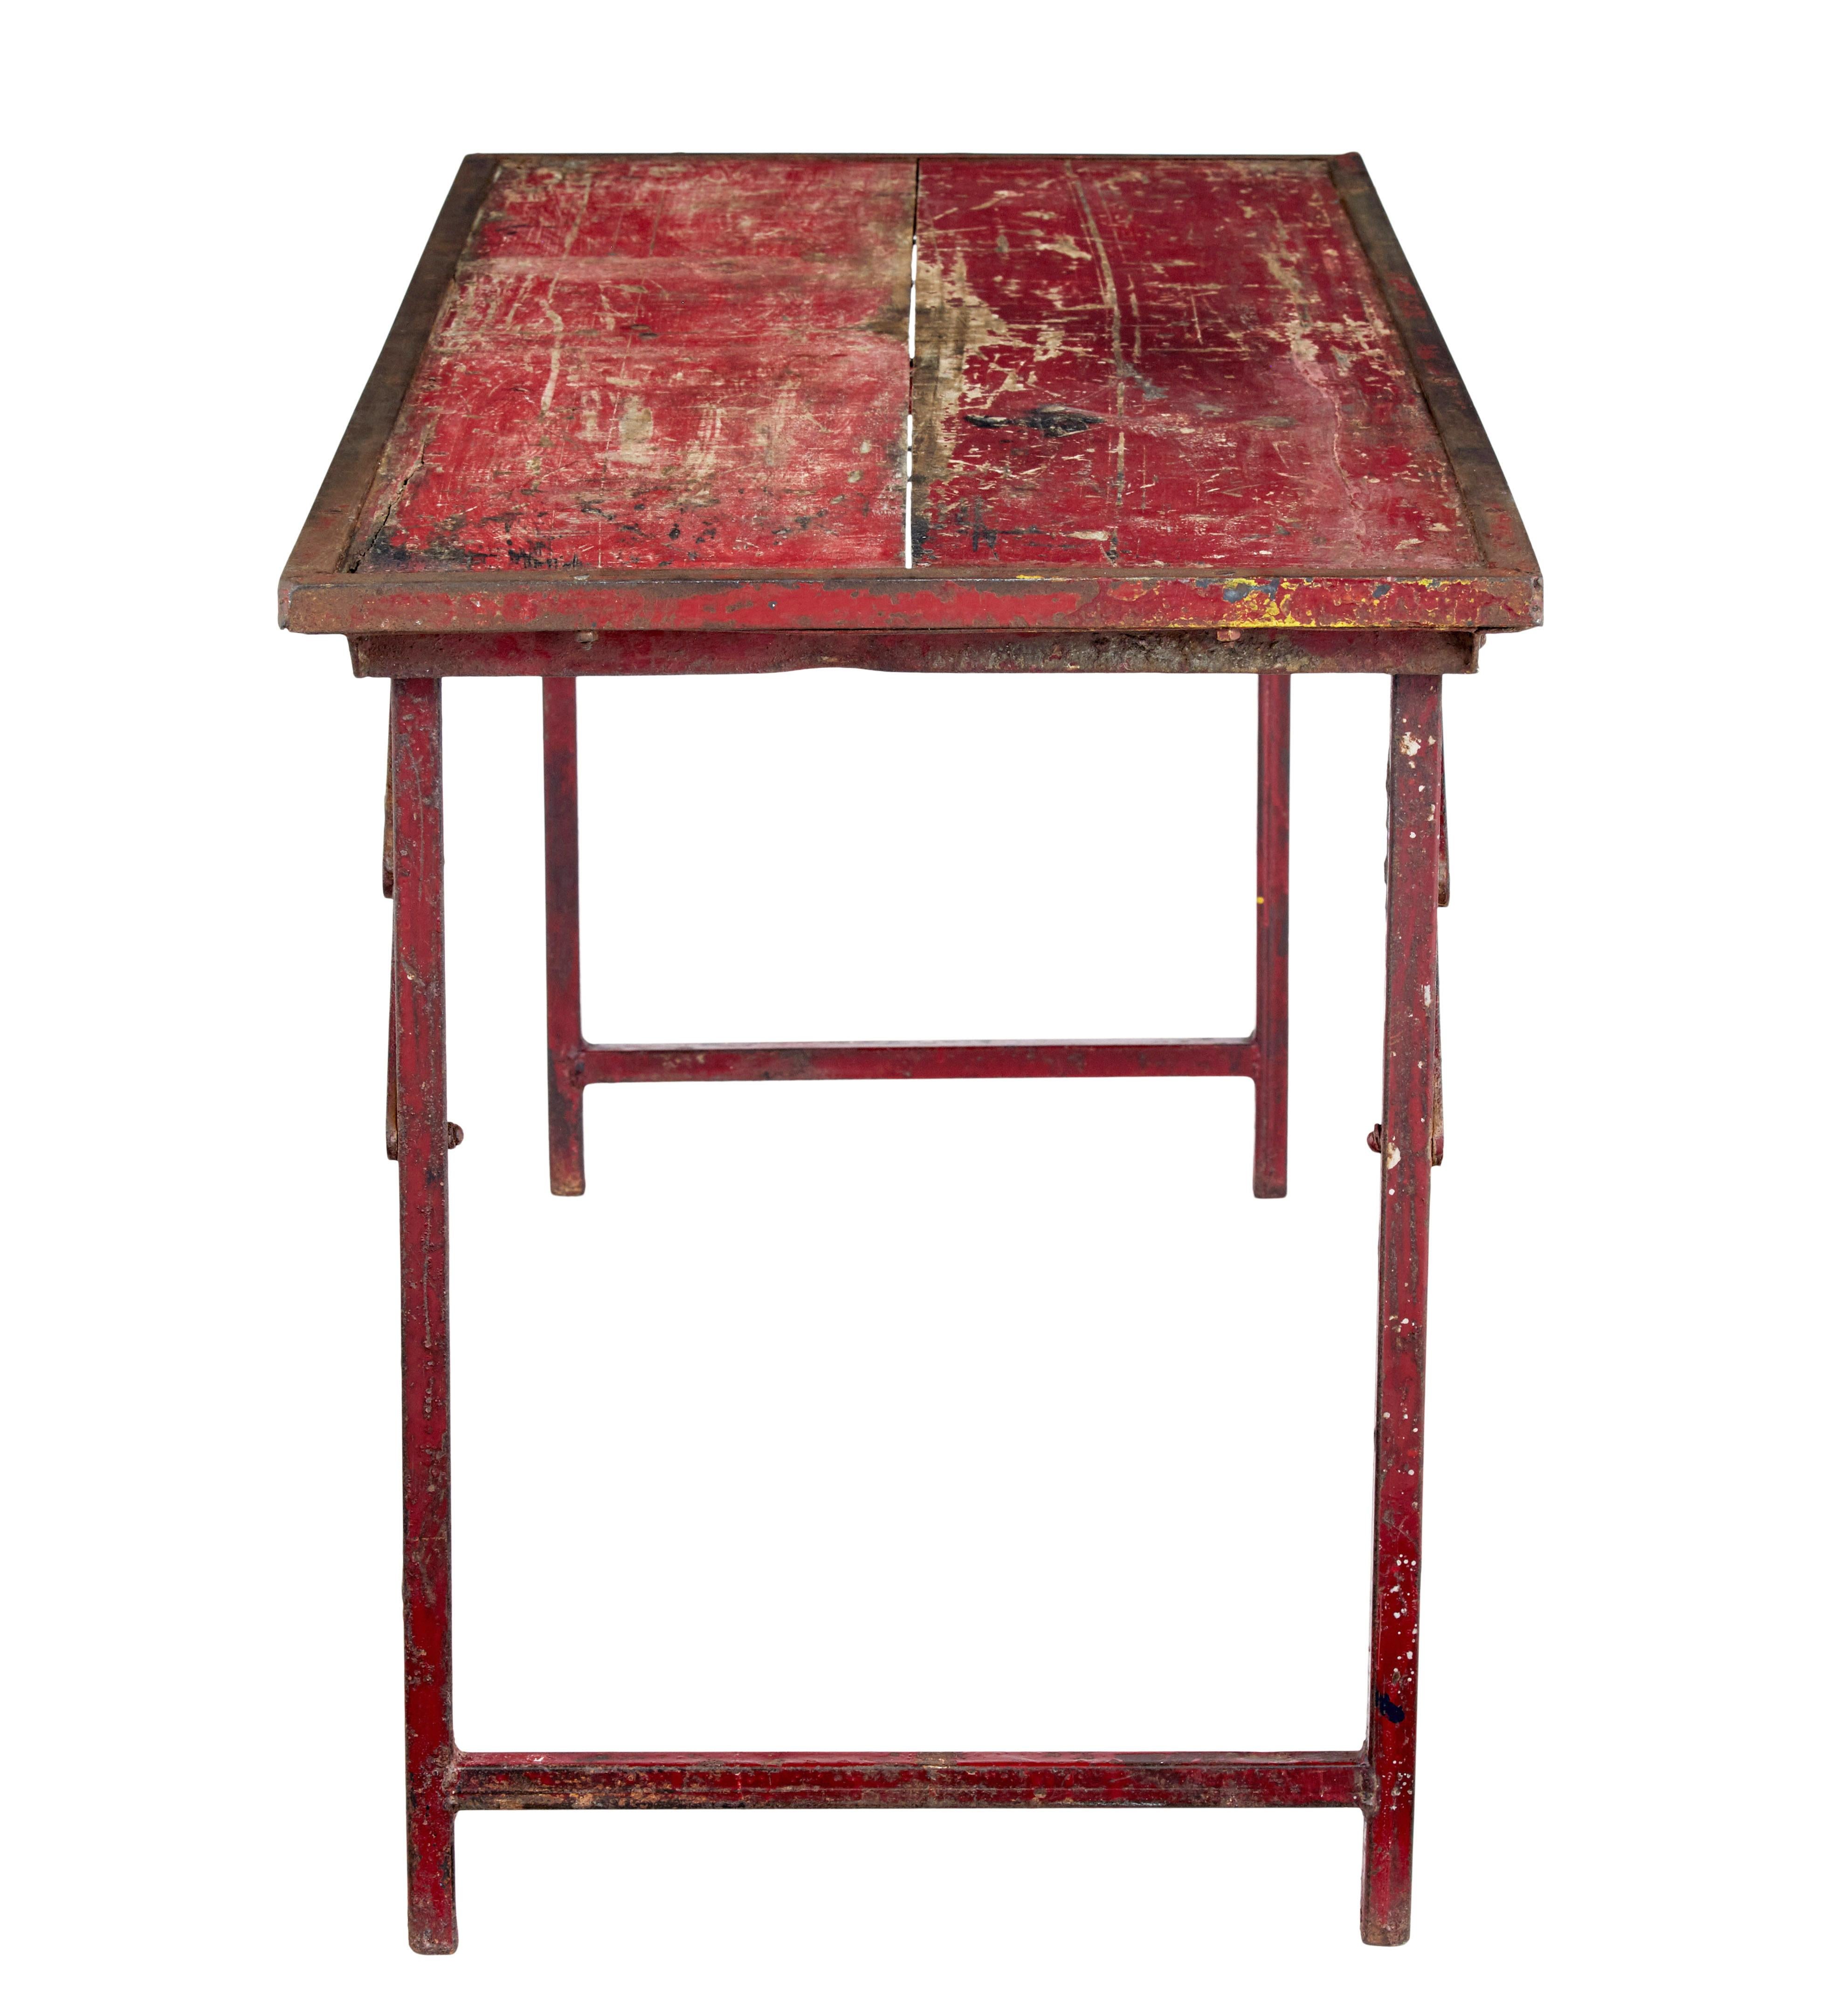 20th Century 1920s’ painted french pine and metal folding table